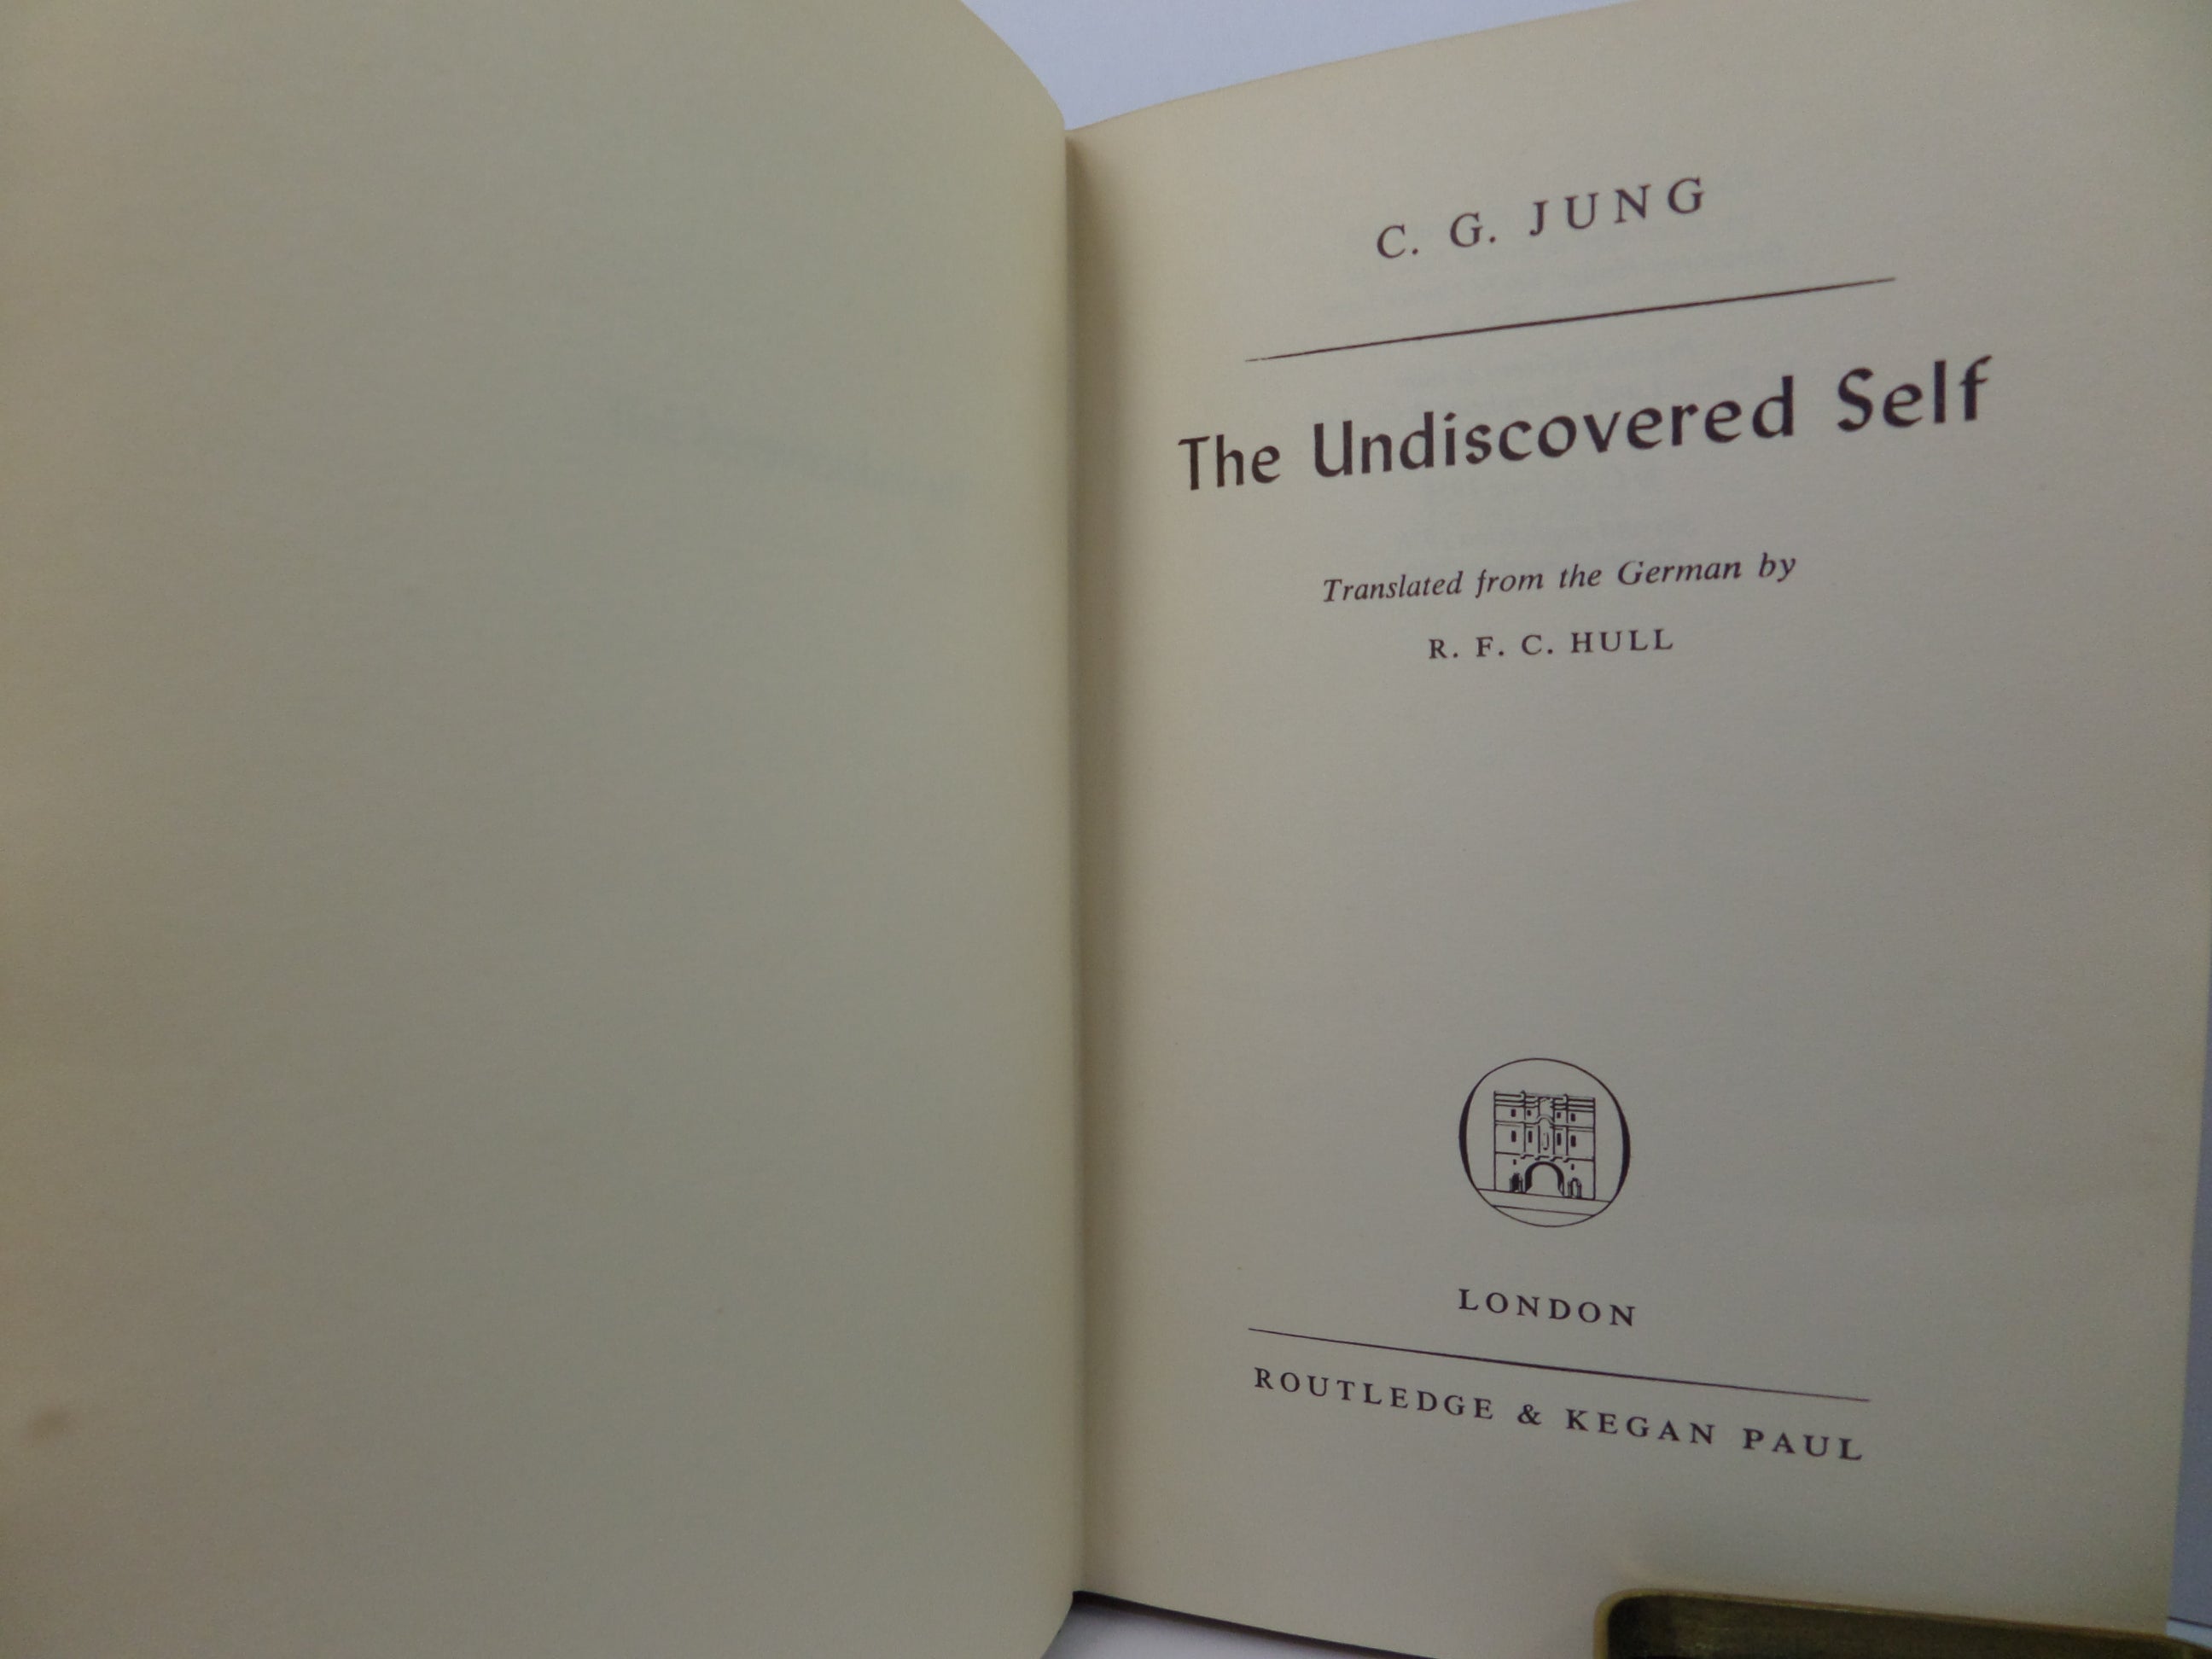 THE UNDISCOVERED SELF BY C. G. JUNG 1960 THIRD IMPRESSION HARDCOVER